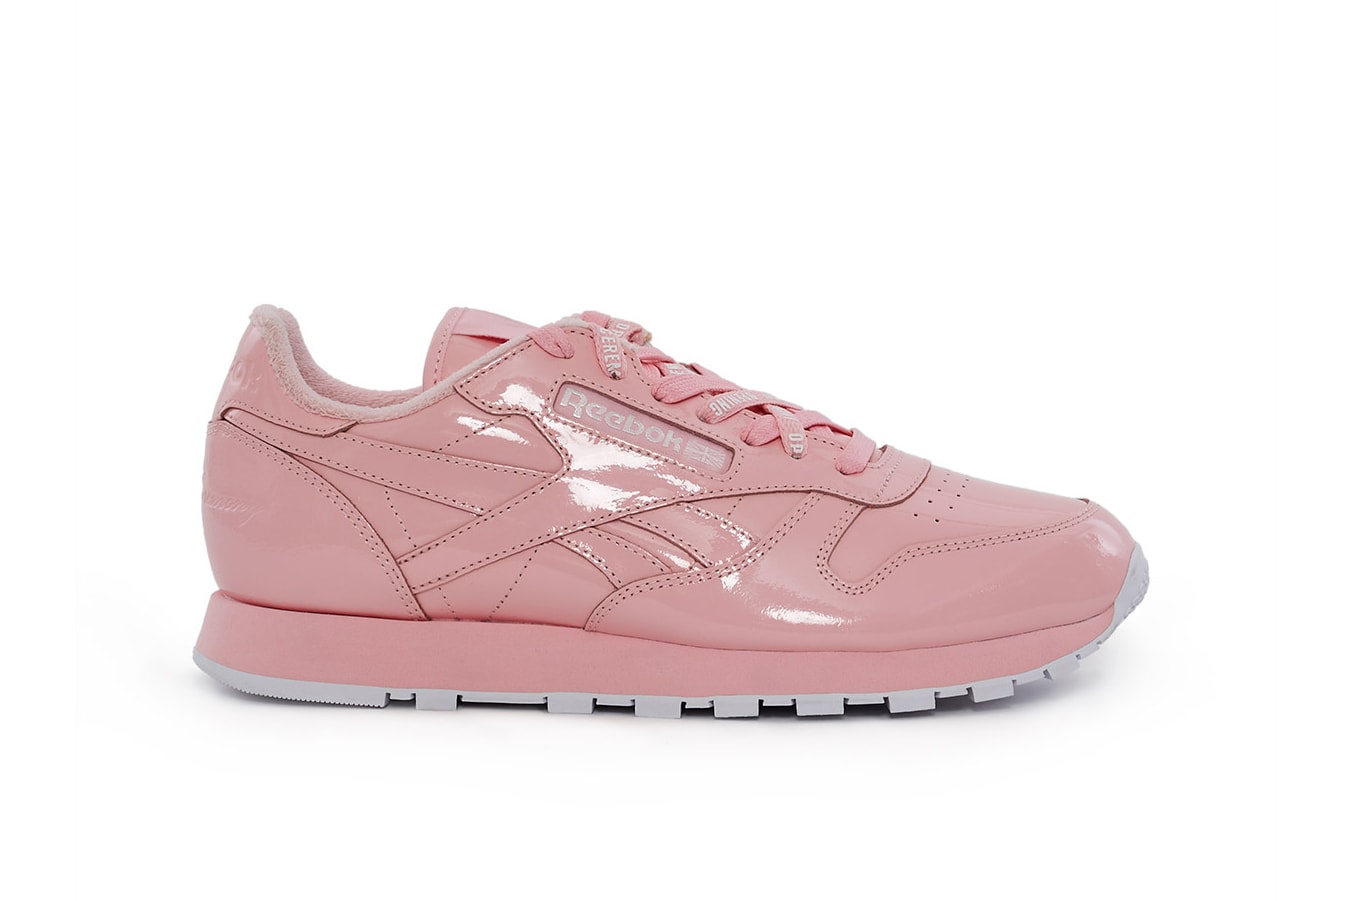 Reebok Opening Ceremony Sneaker Collaboration Patent Leather Glossy Reebok Classic Leather Opening Ceremony Workout Ex-O-Fit